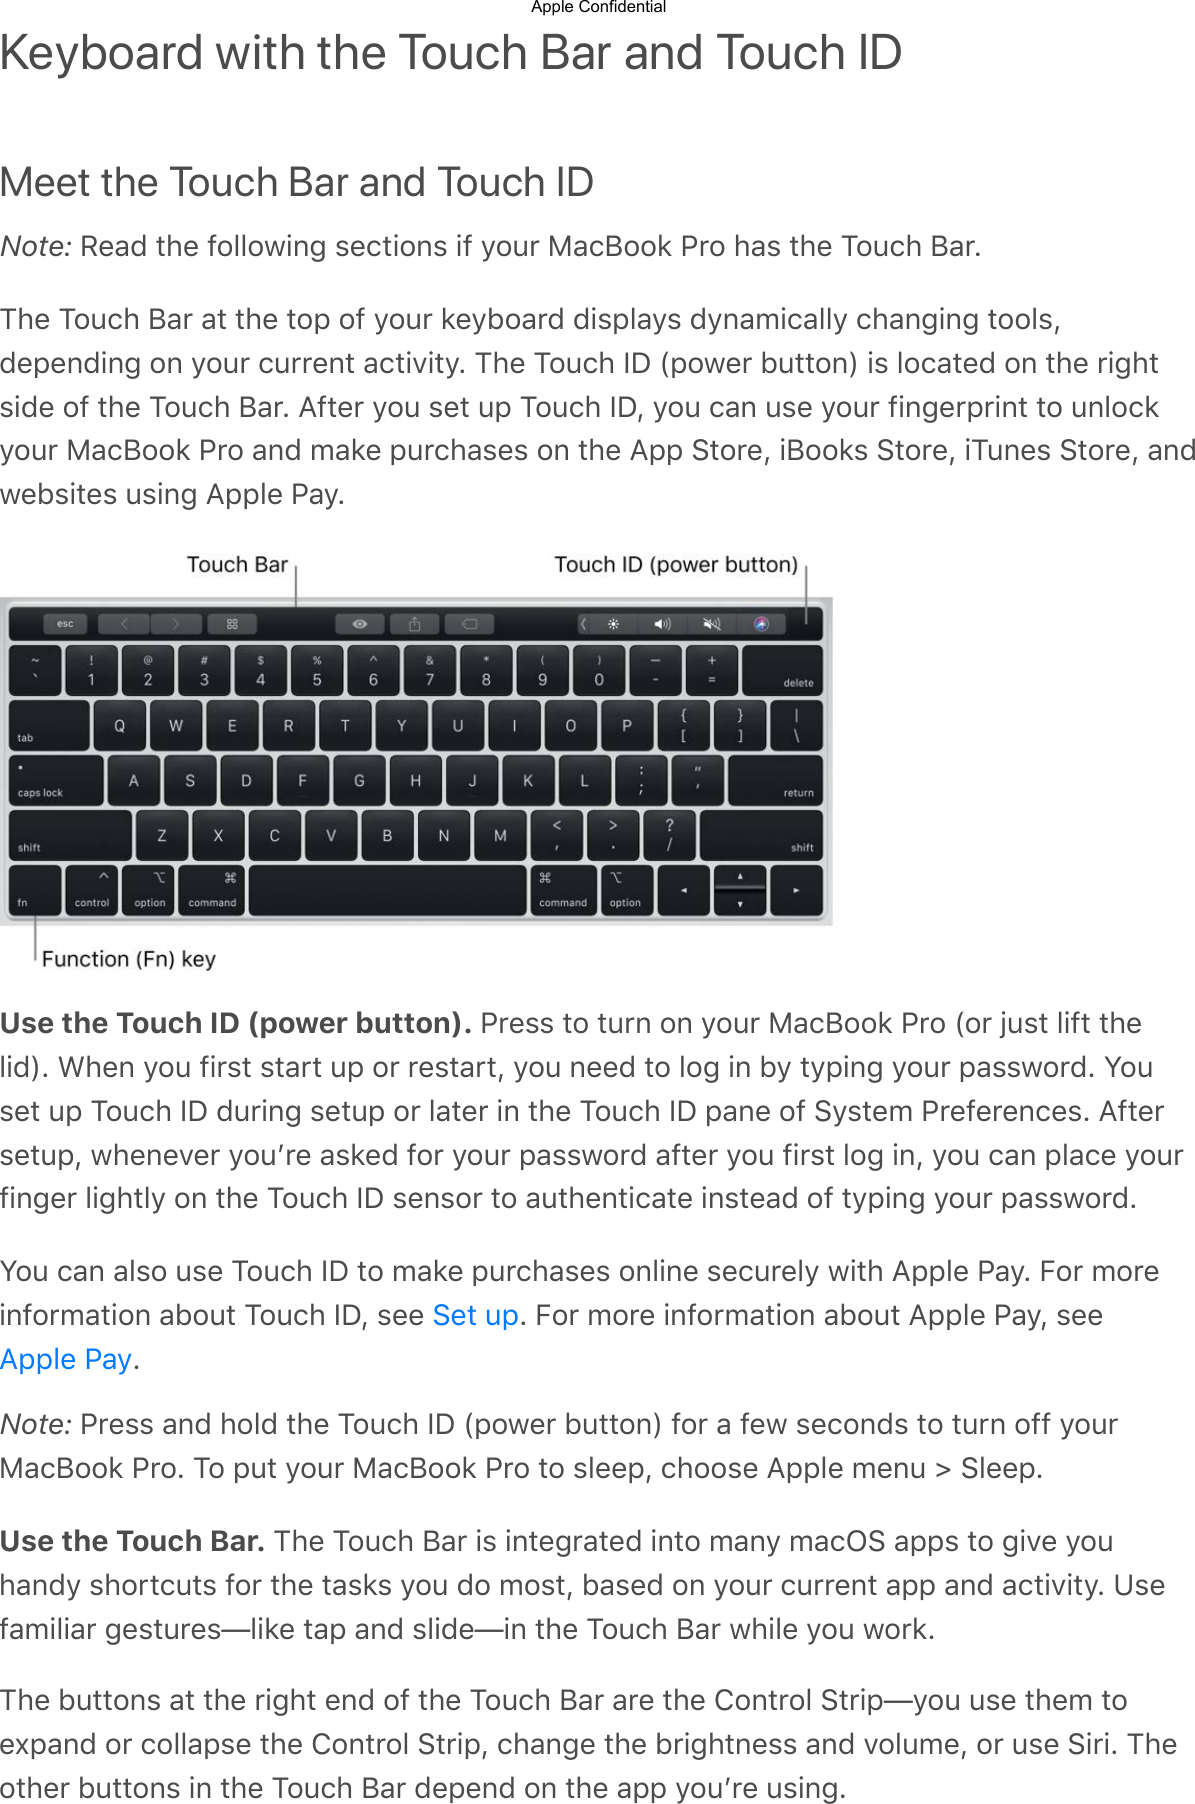 Keyboard with the Touch Bar and Touch IDMeet the Touch Bar and Touch IDNote: d3&amp;2$-.3$!&quot;55&quot;+,17$93&apos;-,&quot;19$,!$@&quot;0#$%&amp;&apos;(&quot;&quot;)$*#&quot;$.&amp;9$-.3$/&quot;0&apos;.$(&amp;#C/.3$/&quot;0&apos;.$(&amp;#$&amp;-$-.3$-&quot;=$&quot;!$@&quot;0#$)3@4&quot;&amp;#2$2,9=5&amp;@9$2@1&amp;B,&apos;&amp;55@$&apos;.&amp;17,17$-&quot;&quot;59A23=312,17$&quot;1$@&quot;0#$&apos;0##31-$&amp;&apos;-,;,-@C$/.3$/&quot;0&apos;.$JK$F=&quot;+3#$40--&quot;1G$,9$5&quot;&apos;&amp;-32$&quot;1$-.3$#,7.-9,23$&quot;!$-.3$/&quot;0&apos;.$(&amp;#C$&lt;!-3#$@&quot;0$93-$0=$/&quot;0&apos;.$JKA$@&quot;0$&apos;&amp;1$093$@&quot;0#$!,173#=#,1-$-&quot;$015&quot;&apos;)@&quot;0#$%&amp;&apos;(&quot;&quot;)$*#&quot;$&amp;12$B&amp;)3$=0#&apos;.&amp;939$&quot;1$-.3$&lt;==$?-&quot;#3A$,(&quot;&quot;)9$?-&quot;#3A$,/0139$?-&quot;#3A$&amp;12+349,-39$09,17$&lt;==53$*&amp;@CUse the Touch ID (power button). *#399$-&quot;$-0#1$&quot;1$@&quot;0#$%&amp;&apos;(&quot;&quot;)$*#&quot;$F&quot;#$N09-$5,!-$-.35,2GC$D.31$@&quot;0$!,#9-$9-&amp;#-$0=$&quot;#$#39-&amp;#-A$@&quot;0$1332$-&quot;$5&quot;7$,1$4@$-@=,17$@&quot;0#$=&amp;99+&quot;#2C$Z&quot;093-$0=$/&quot;0&apos;.$JK$20#,17$93-0=$&quot;#$5&amp;-3#$,1$-.3$/&quot;0&apos;.$JK$=&amp;13$&quot;!$?@9-3B$*#3!3#31&apos;39C$&lt;!-3#93-0=A$+.313;3#$@&quot;0L#3$&amp;9)32$!&quot;#$@&quot;0#$=&amp;99+&quot;#2$&amp;!-3#$@&quot;0$!,#9-$5&quot;7$,1A$@&quot;0$&apos;&amp;1$=5&amp;&apos;3$@&quot;0#!,173#$5,7.-5@$&quot;1$-.3$/&quot;0&apos;.$JK$9319&quot;#$-&quot;$&amp;0-.31-,&apos;&amp;-3$,19-3&amp;2$&quot;!$-@=,17$@&quot;0#$=&amp;99+&quot;#2CZ&quot;0$&apos;&amp;1$&amp;59&quot;$093$/&quot;0&apos;.$JK$-&quot;$B&amp;)3$=0#&apos;.&amp;939$&quot;15,13$93&apos;0#35@$+,-.$&lt;==53$*&amp;@C$&gt;&quot;#$B&quot;#3,1!&quot;#B&amp;-,&quot;1$&amp;4&quot;0-$/&quot;0&apos;.$JKA$933$ C$&gt;&quot;#$B&quot;#3$,1!&quot;#B&amp;-,&quot;1$&amp;4&quot;0-$&lt;==53$*&amp;@A$933CNote: *#399$&amp;12$.&quot;52$-.3$/&quot;0&apos;.$JK$F=&quot;+3#$40--&quot;1G$!&quot;#$&amp;$!3+$93&apos;&quot;129$-&quot;$-0#1$&quot;!!$@&quot;0#%&amp;&apos;(&quot;&quot;)$*#&quot;C$/&quot;$=0-$@&quot;0#$%&amp;&apos;(&quot;&quot;)$*#&quot;$-&quot;$9533=A$&apos;.&quot;&quot;93$&lt;==53$B310$c$?533=CUse the Touch Bar. /.3$/&quot;0&apos;.$(&amp;#$,9$,1-37#&amp;-32$,1-&quot;$B&amp;1@$B&amp;&apos;O?$&amp;==9$-&quot;$7,;3$@&quot;0.&amp;12@$9.&quot;#-&apos;0-9$!&quot;#$-.3$-&amp;9)9$@&quot;0$2&quot;$B&quot;9-A$4&amp;932$&quot;1$@&quot;0#$&apos;0##31-$&amp;==$&amp;12$&amp;&apos;-,;,-@C$:93!&amp;B,5,&amp;#$739-0#39a5,)3$-&amp;=$&amp;12$95,23a,1$-.3$/&quot;0&apos;.$(&amp;#$+.,53$@&quot;0$+&quot;#)C/.3$40--&quot;19$&amp;-$-.3$#,7.-$312$&quot;!$-.3$/&quot;0&apos;.$(&amp;#$&amp;#3$-.3$M&quot;1-#&quot;5$?-#,=a@&quot;0$093$-.3B$-&quot;3I=&amp;12$&quot;#$&apos;&quot;55&amp;=93$-.3$M&quot;1-#&quot;5$?-#,=A$&apos;.&amp;173$-.3$4#,7.-1399$&amp;12$;&quot;50B3A$&quot;#$093$?,#,C$/.3&quot;-.3#$40--&quot;19$,1$-.3$/&quot;0&apos;.$(&amp;#$23=312$&quot;1$-.3$&amp;==$@&quot;0L#3$09,17C?3-$0=&lt;==53$*&amp;@Apple Confidential